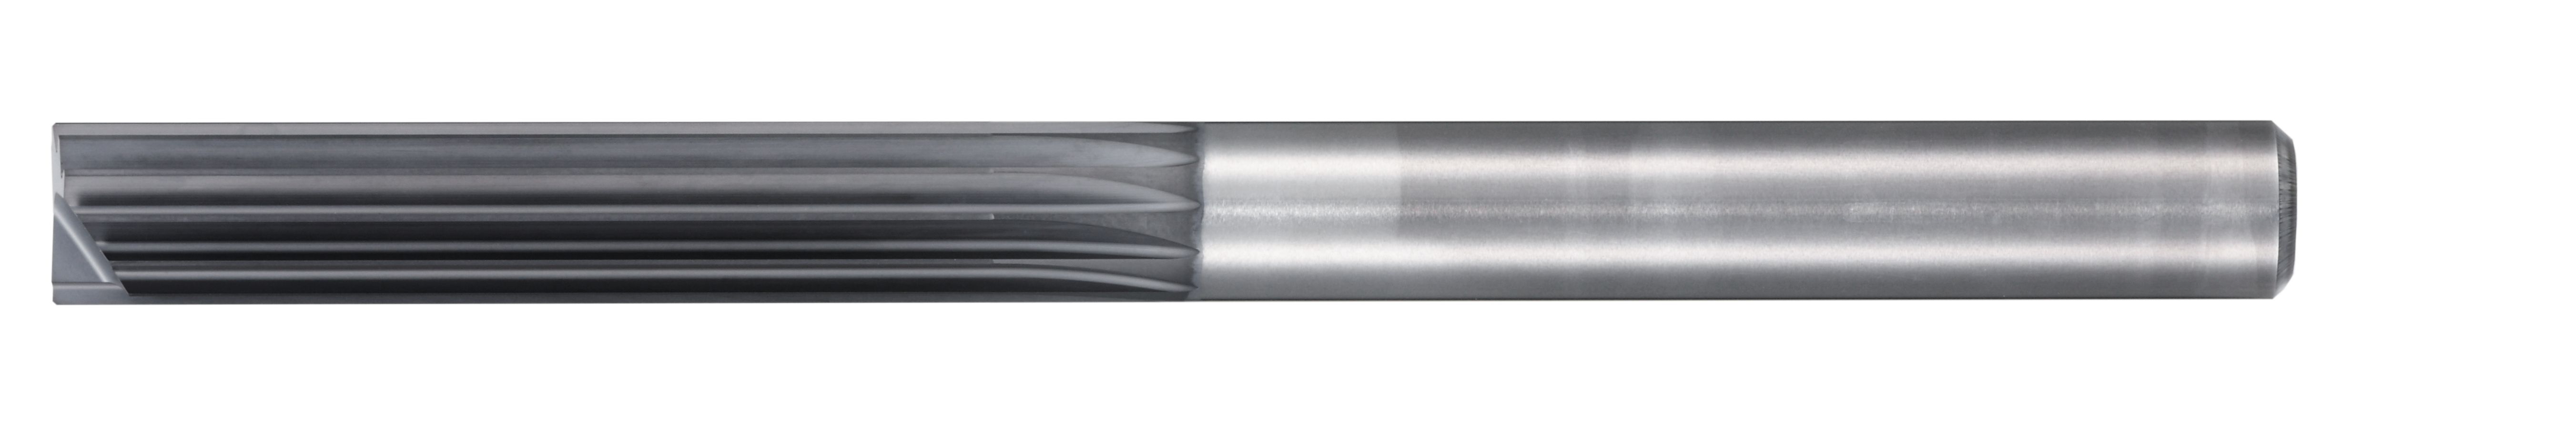 Grooving/Shouldering Multi-Flute End Mill for CFRP with End Flute CR100 6719 (6719-004.000) 